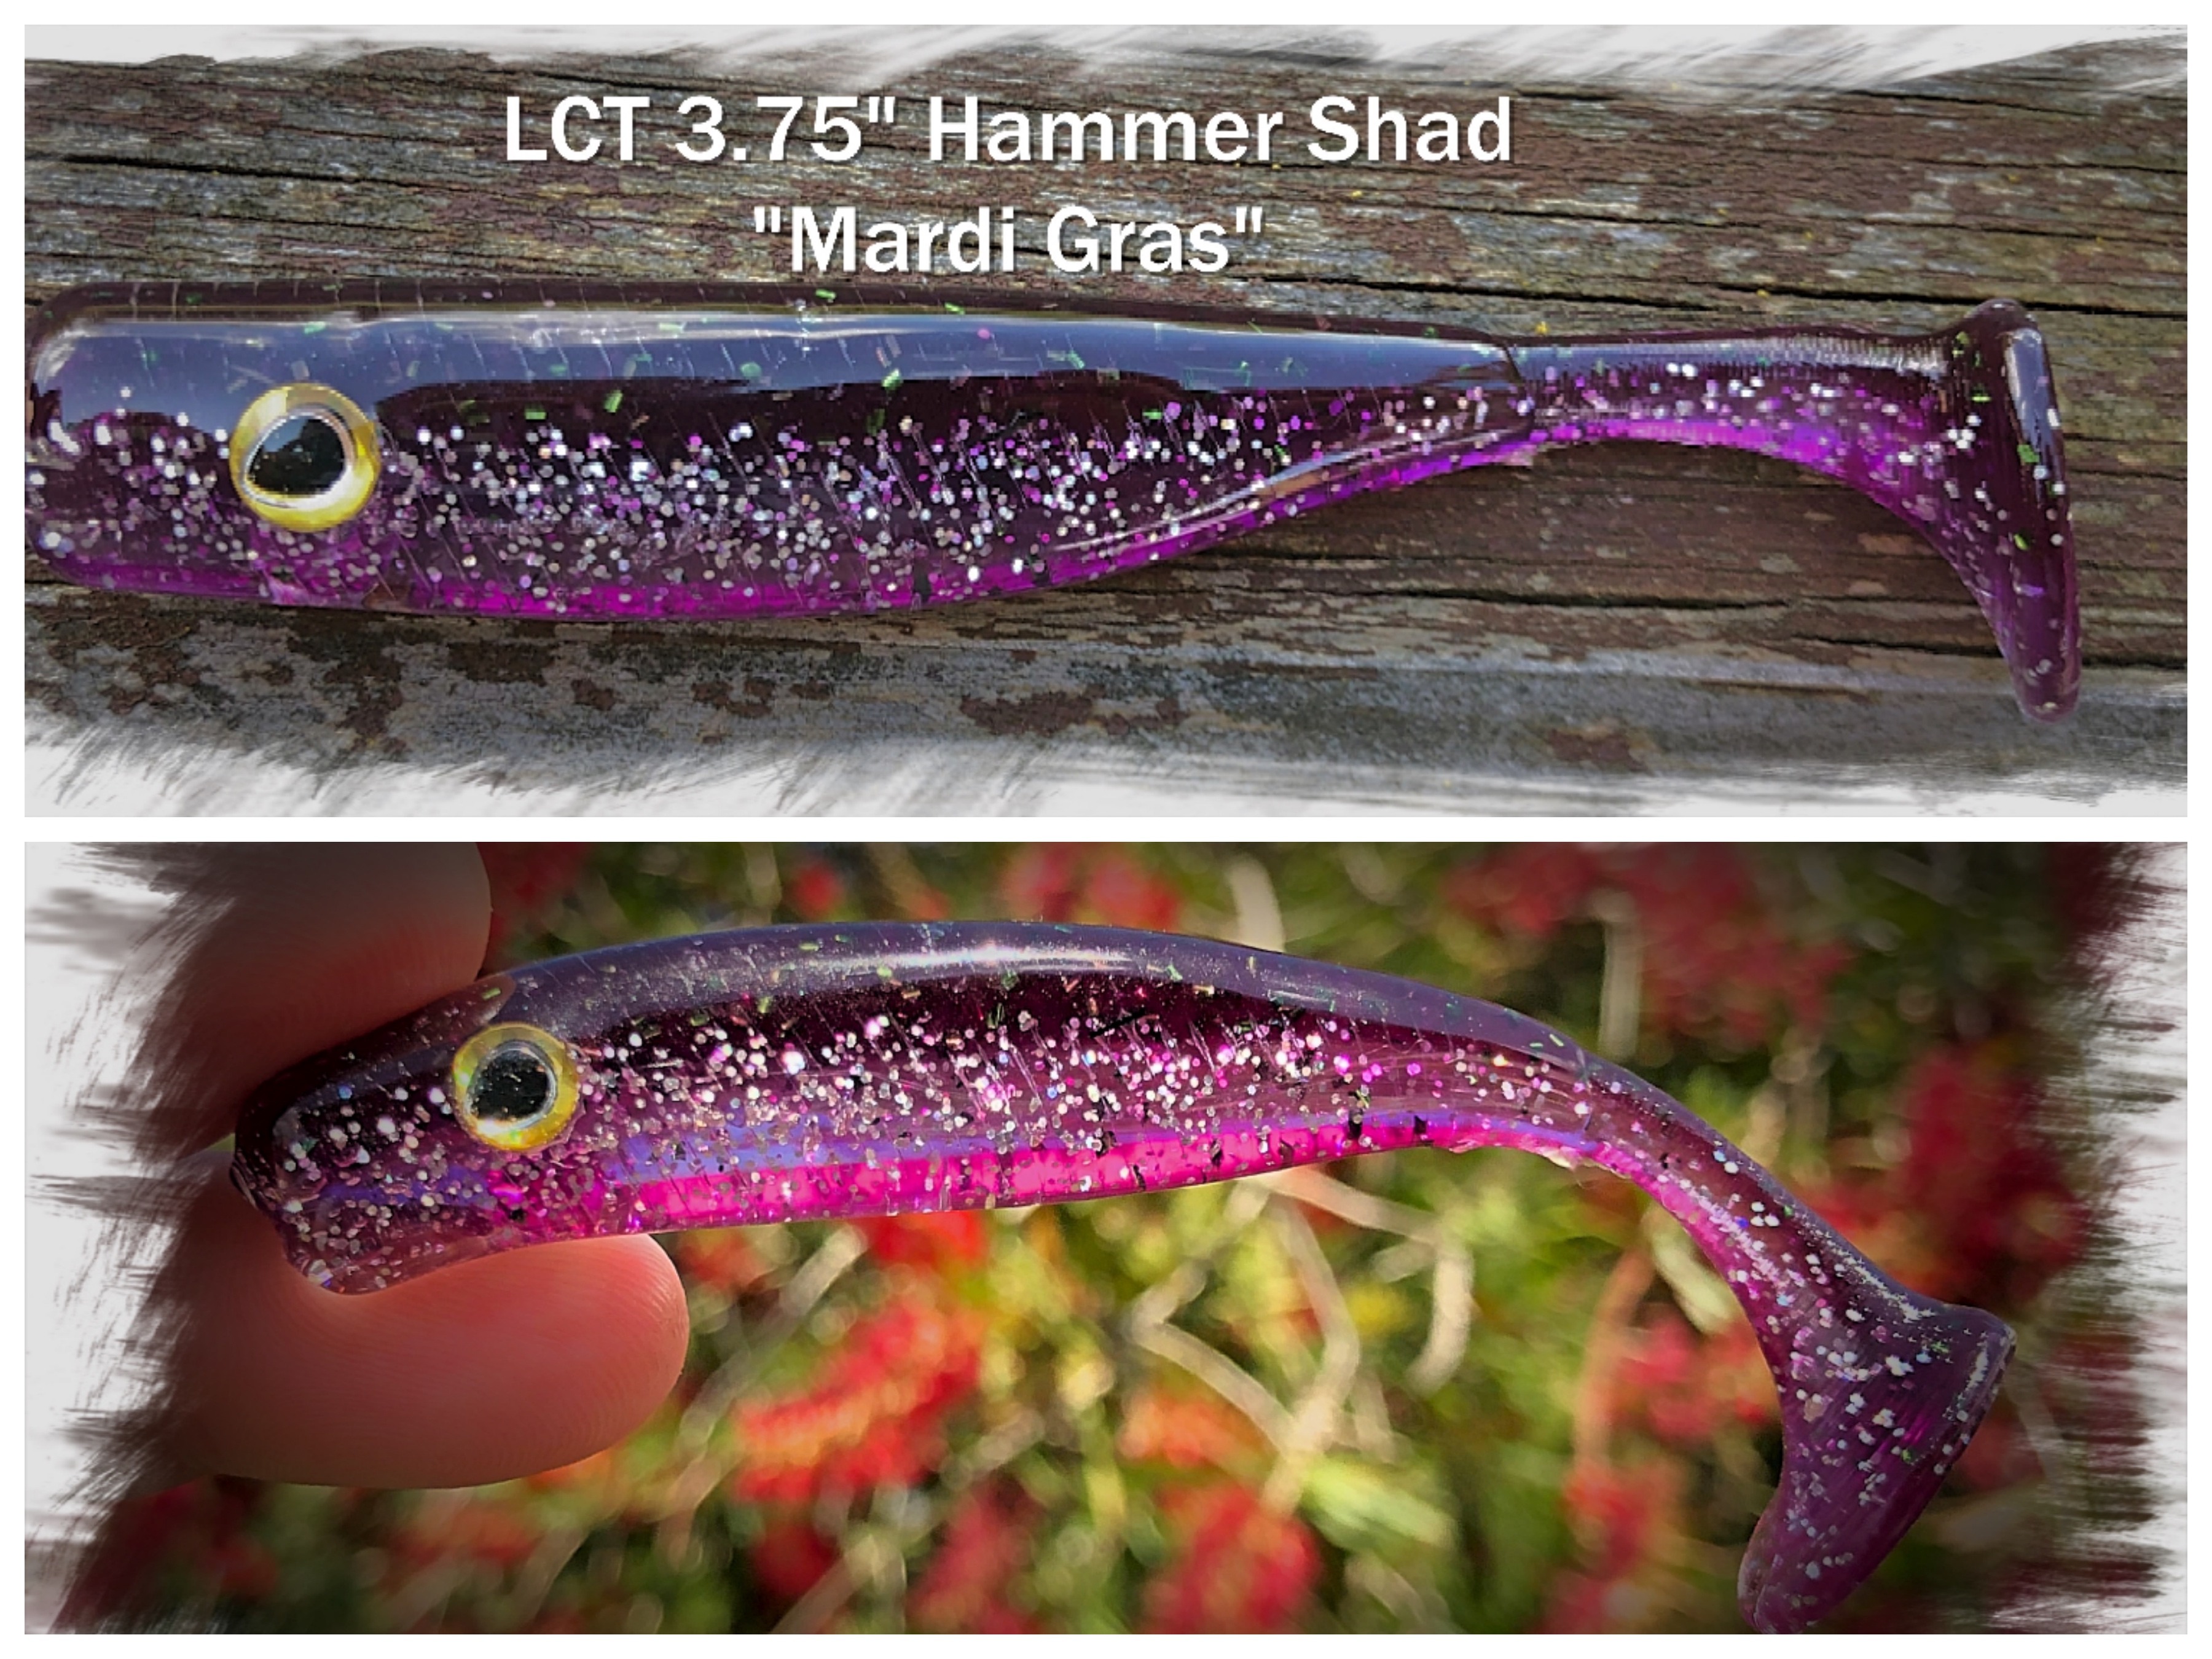 LCT 3.75″ Ribbed Shad (5 Pack) Electric Shad – Legacy Custom Tackle